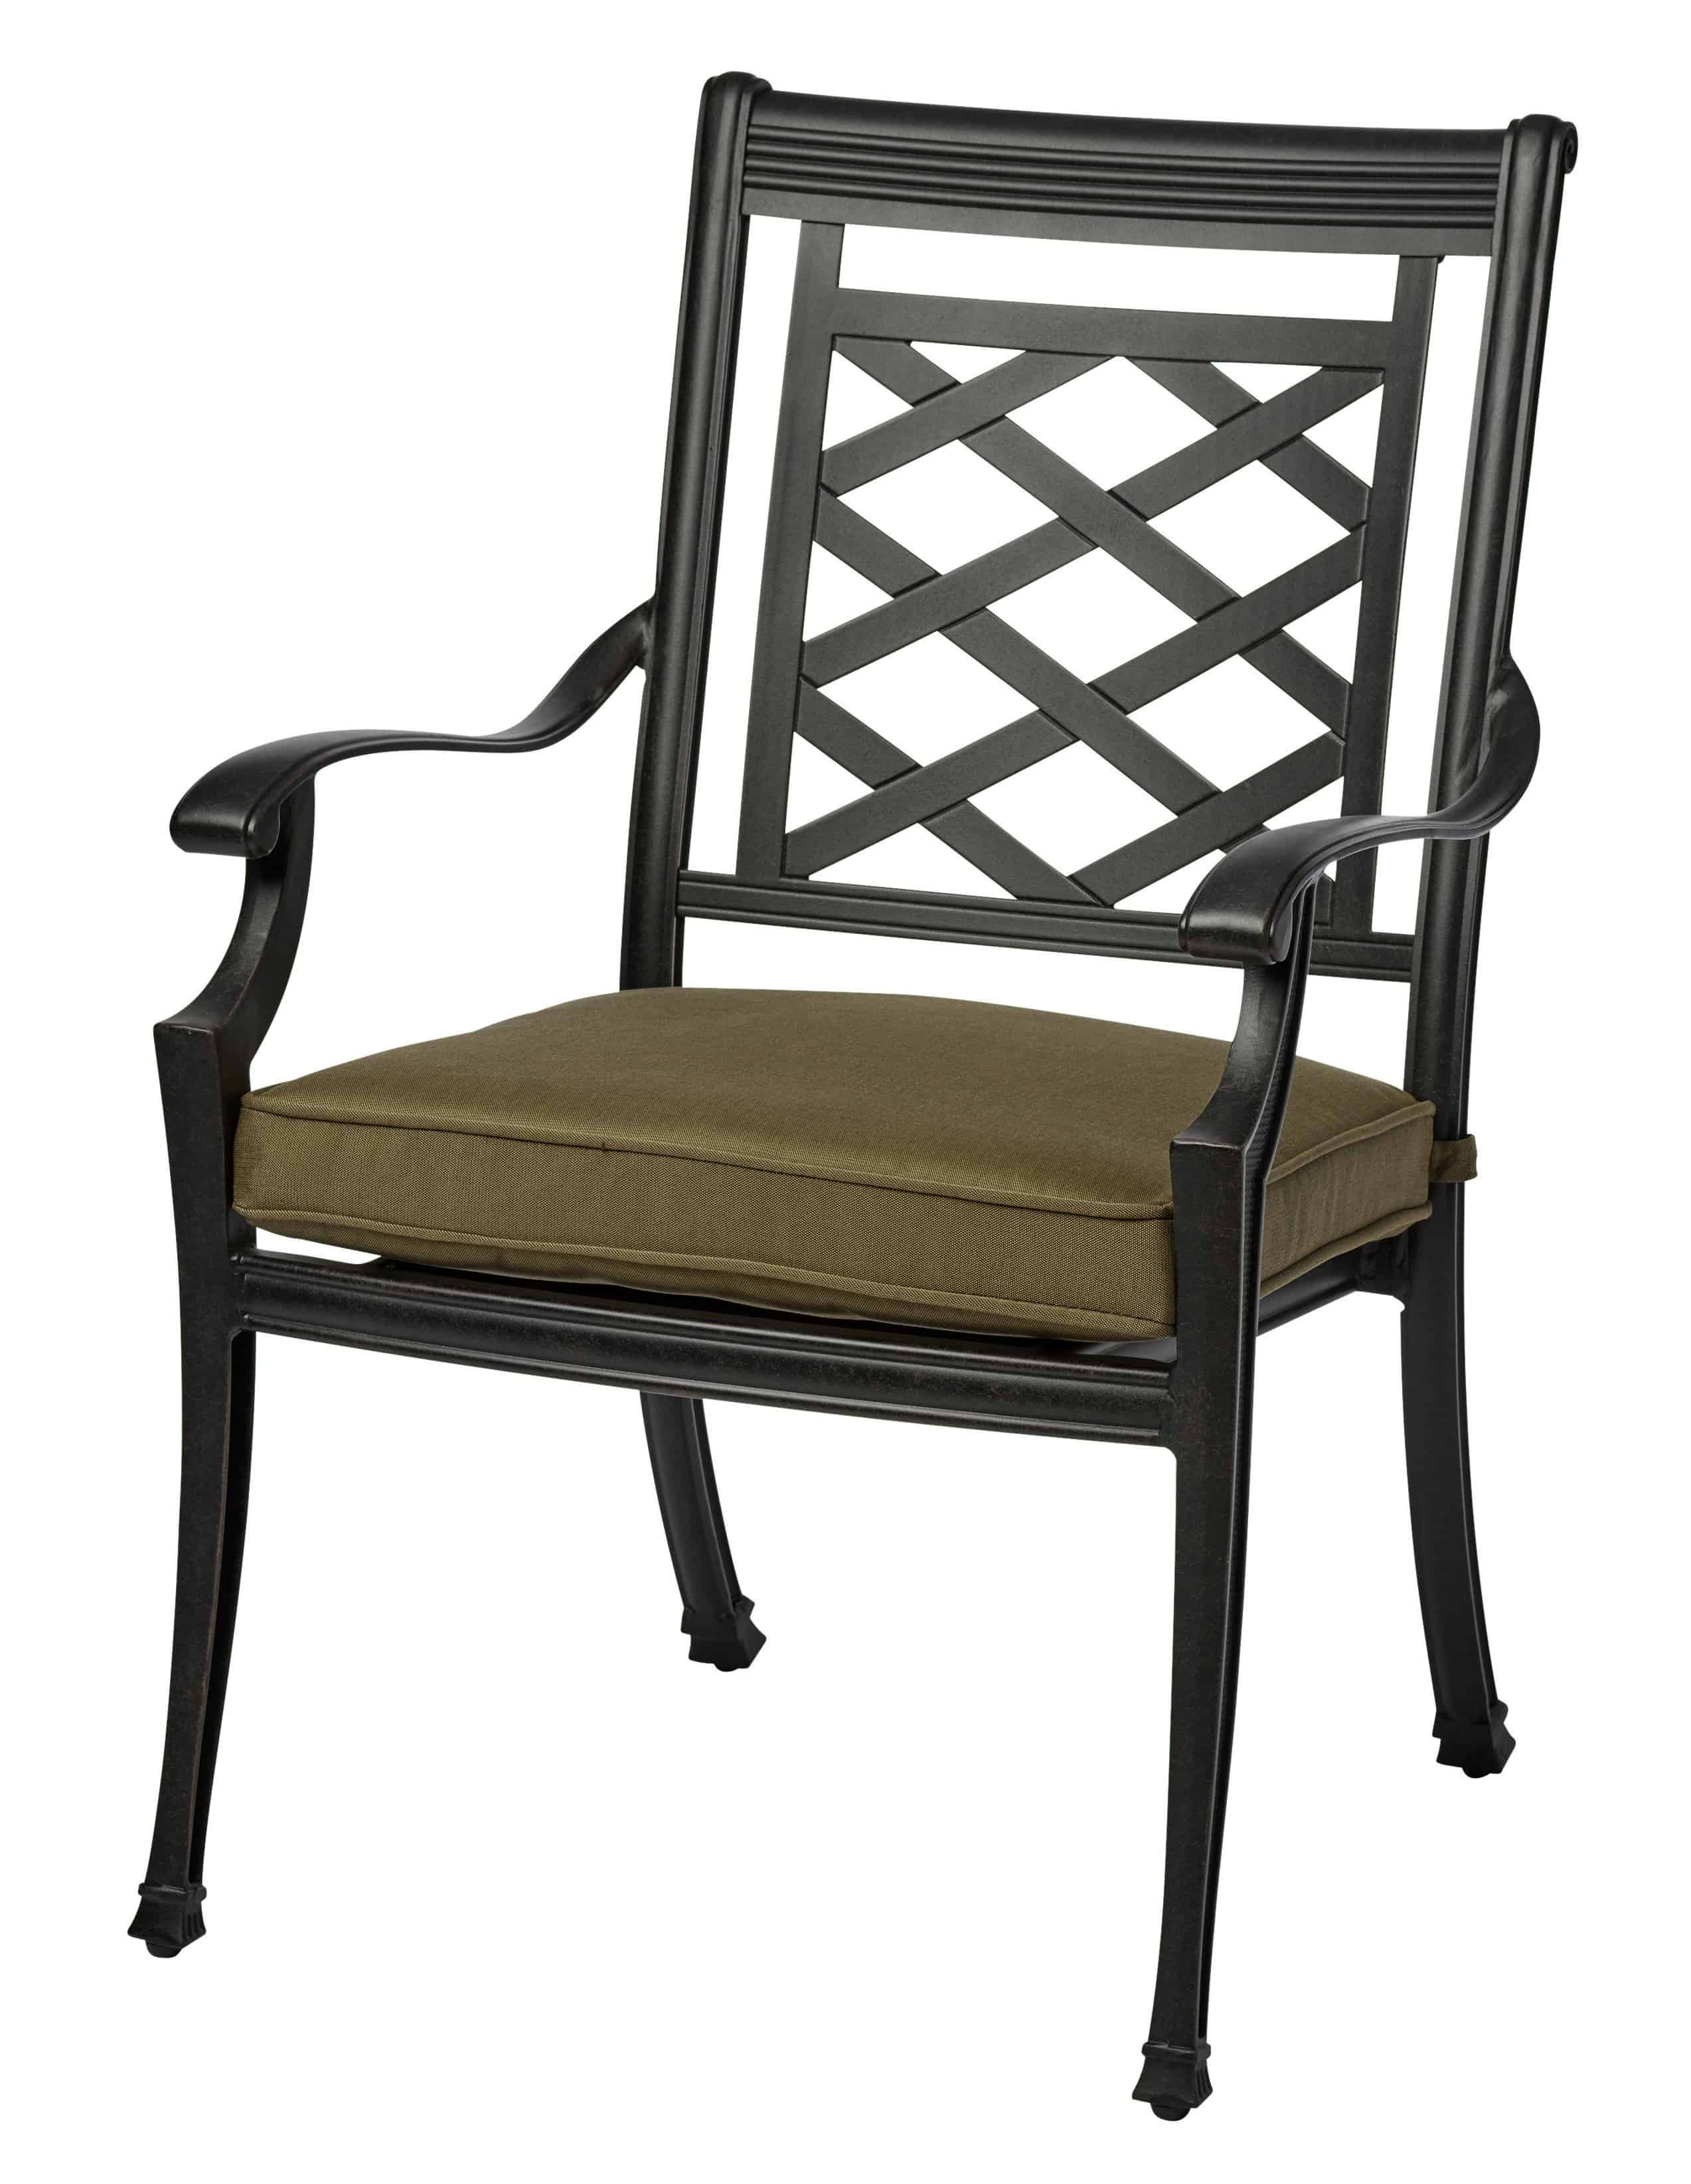 Melton Craft Yarra Chair with Cushion - Tucker Barbecues